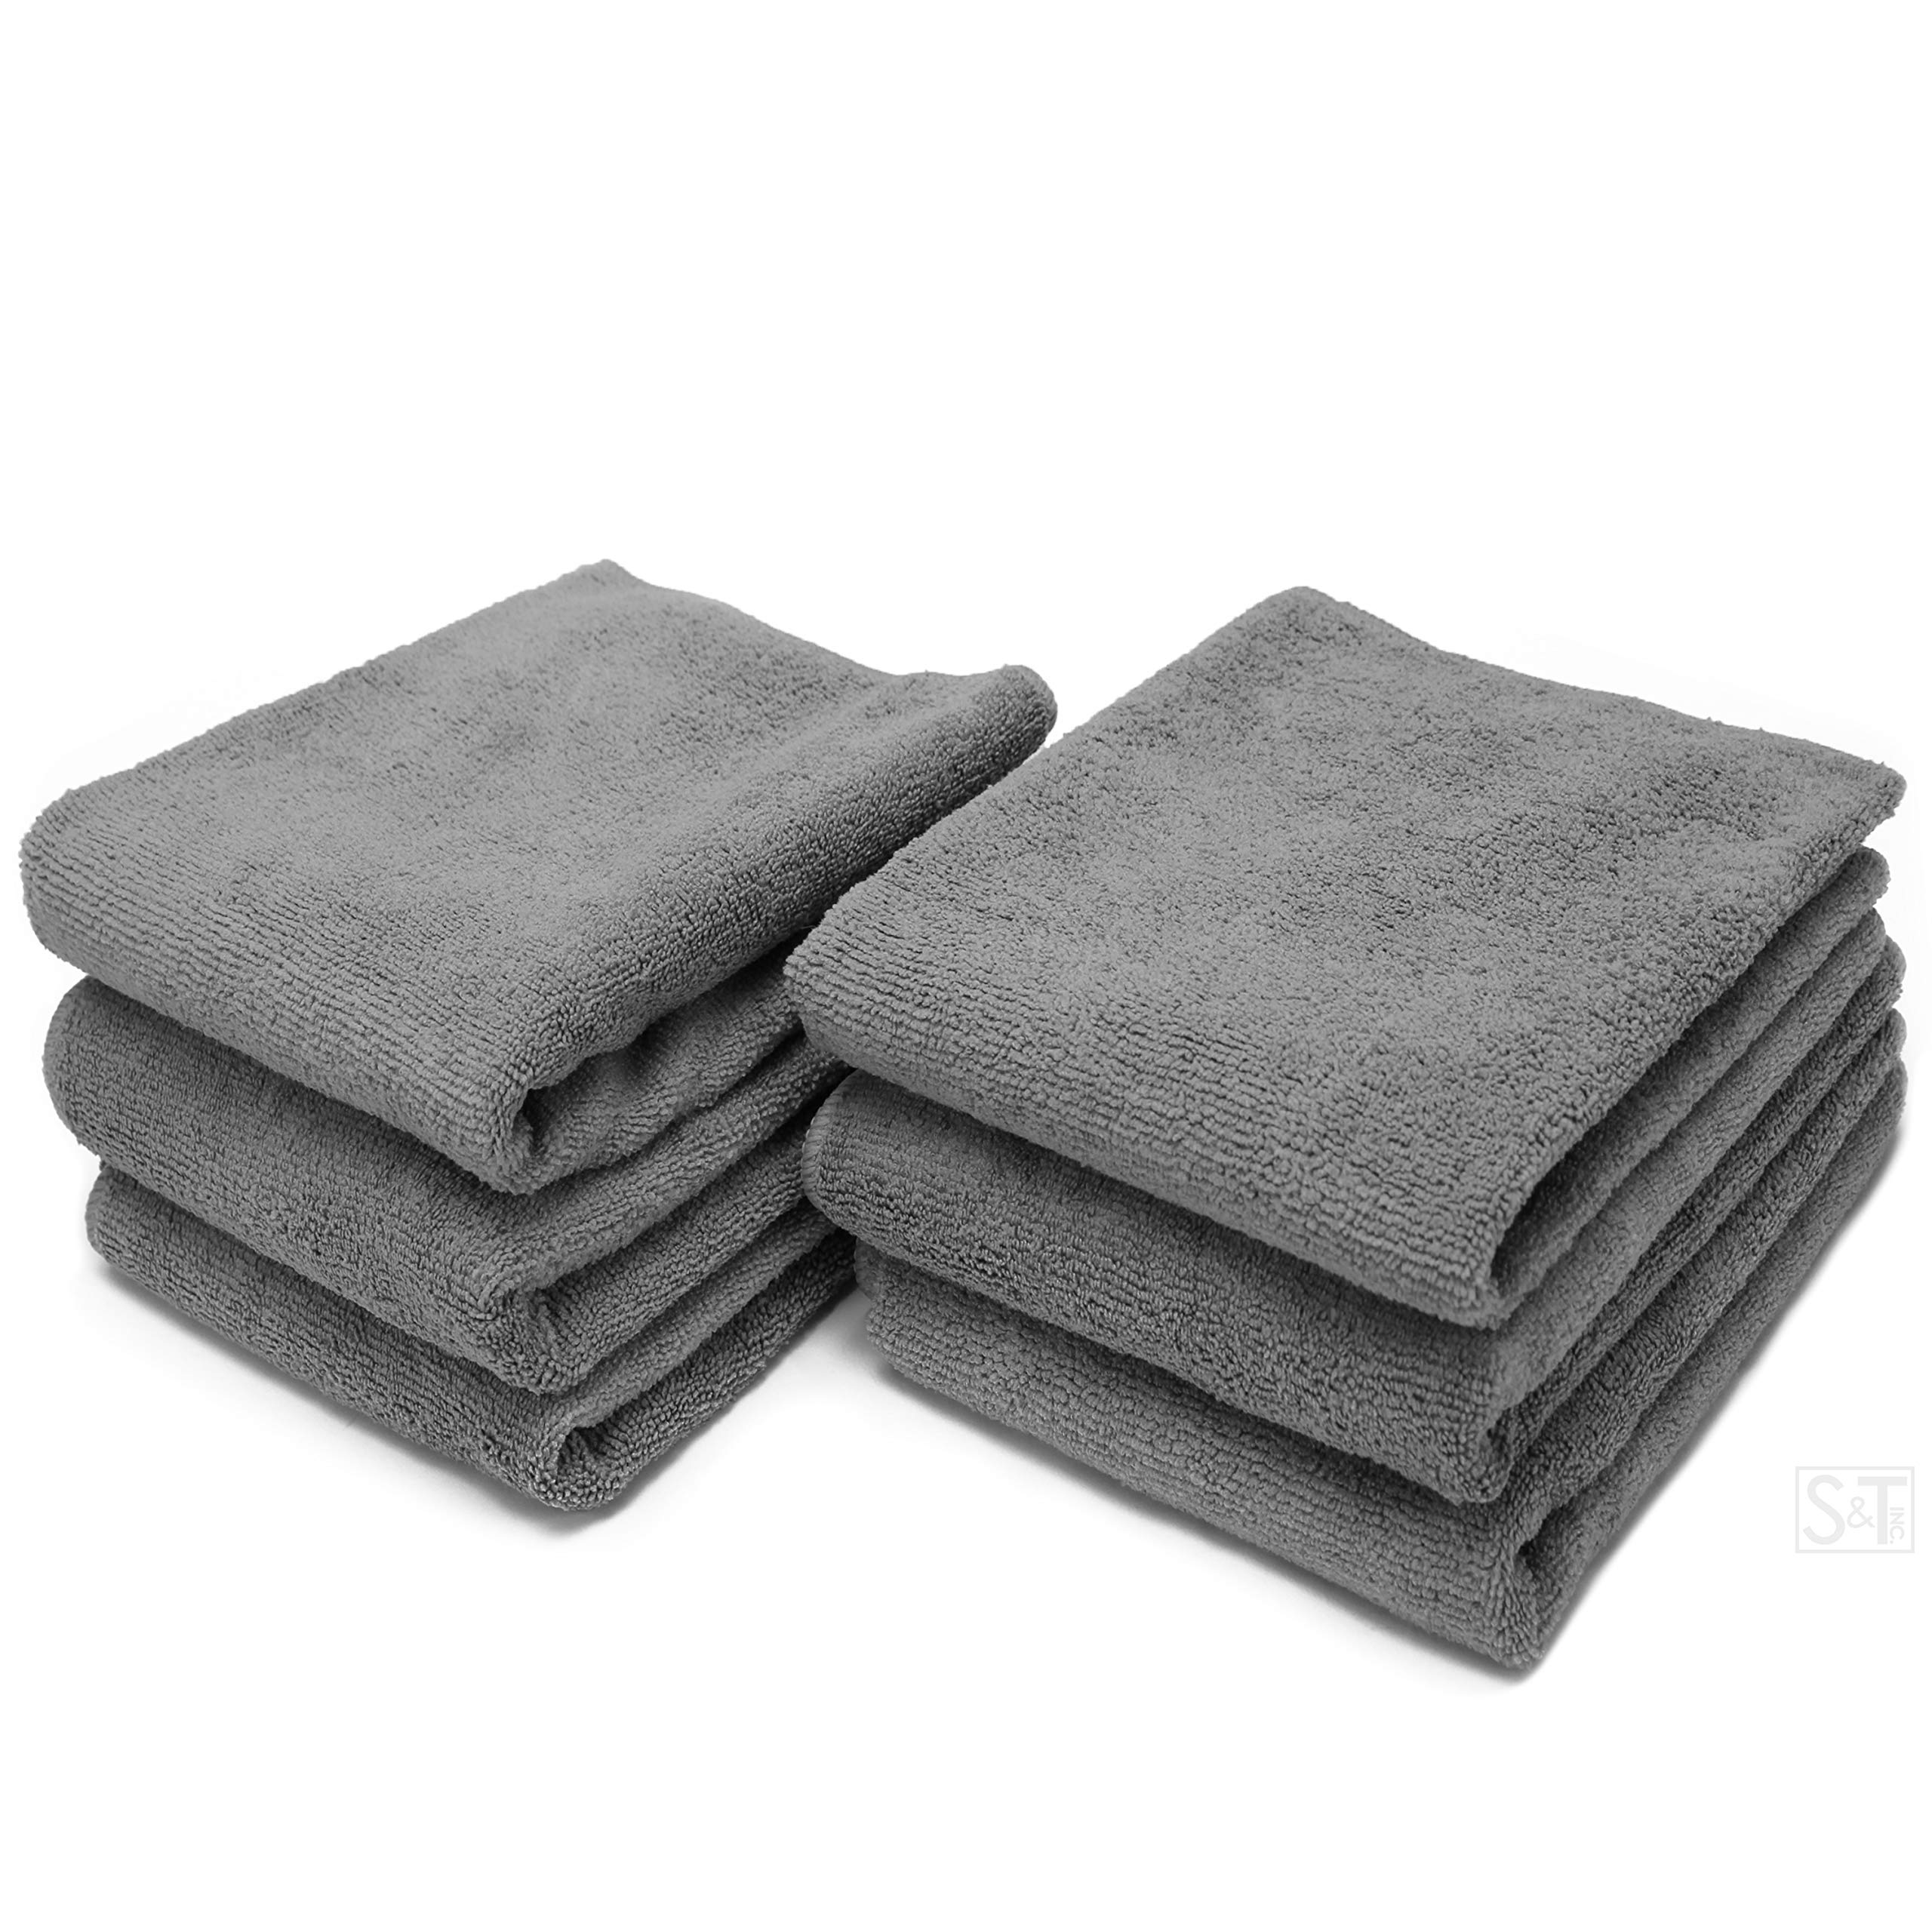 S&T INC. Microfiber Gym Towels for Sweat, Yoga Sweat Towel for Home Gym,  Microfiber Workout Towels for Gym, 16 Inch x 27 Inch, 6 Pack Grey 6 Pack